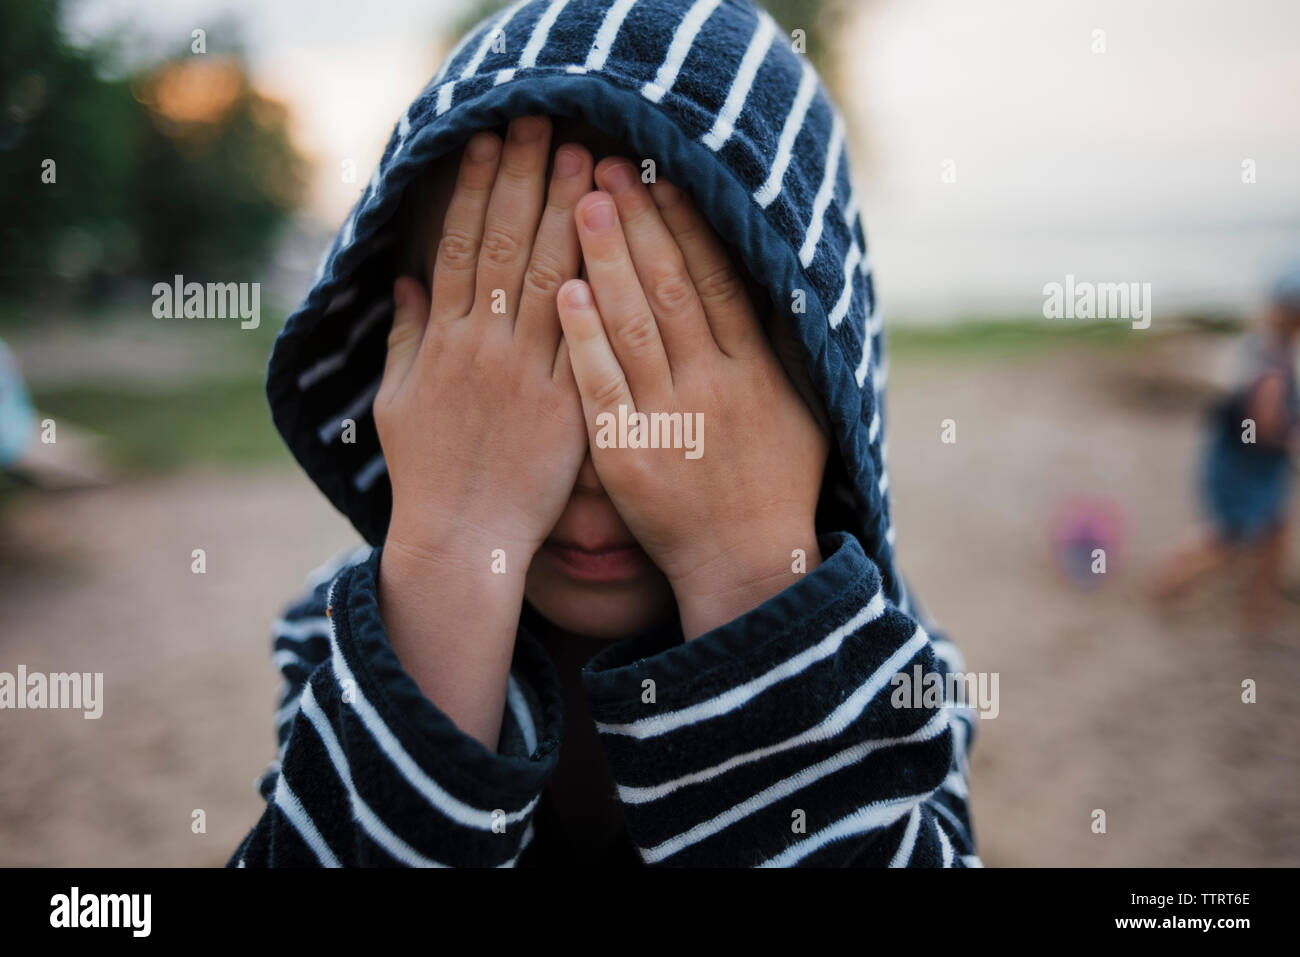 Boy in hooded shirt with hands covering face at beach Banque D'Images